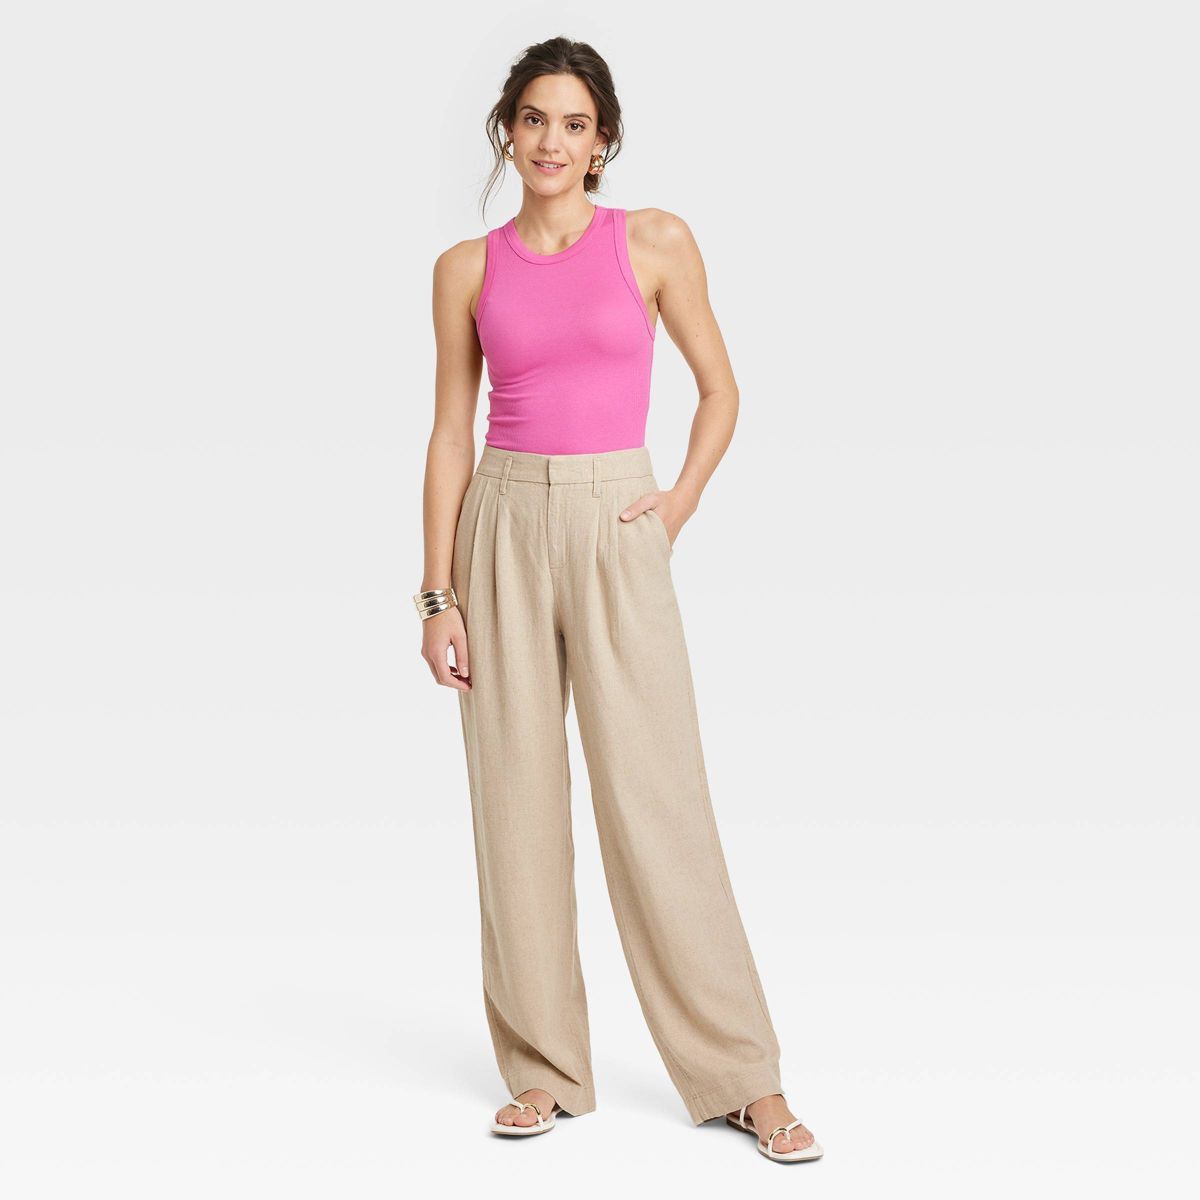 Women's High-Rise Linen Pleat Front Straight Pants - A New Day™ Tan 6 | Target